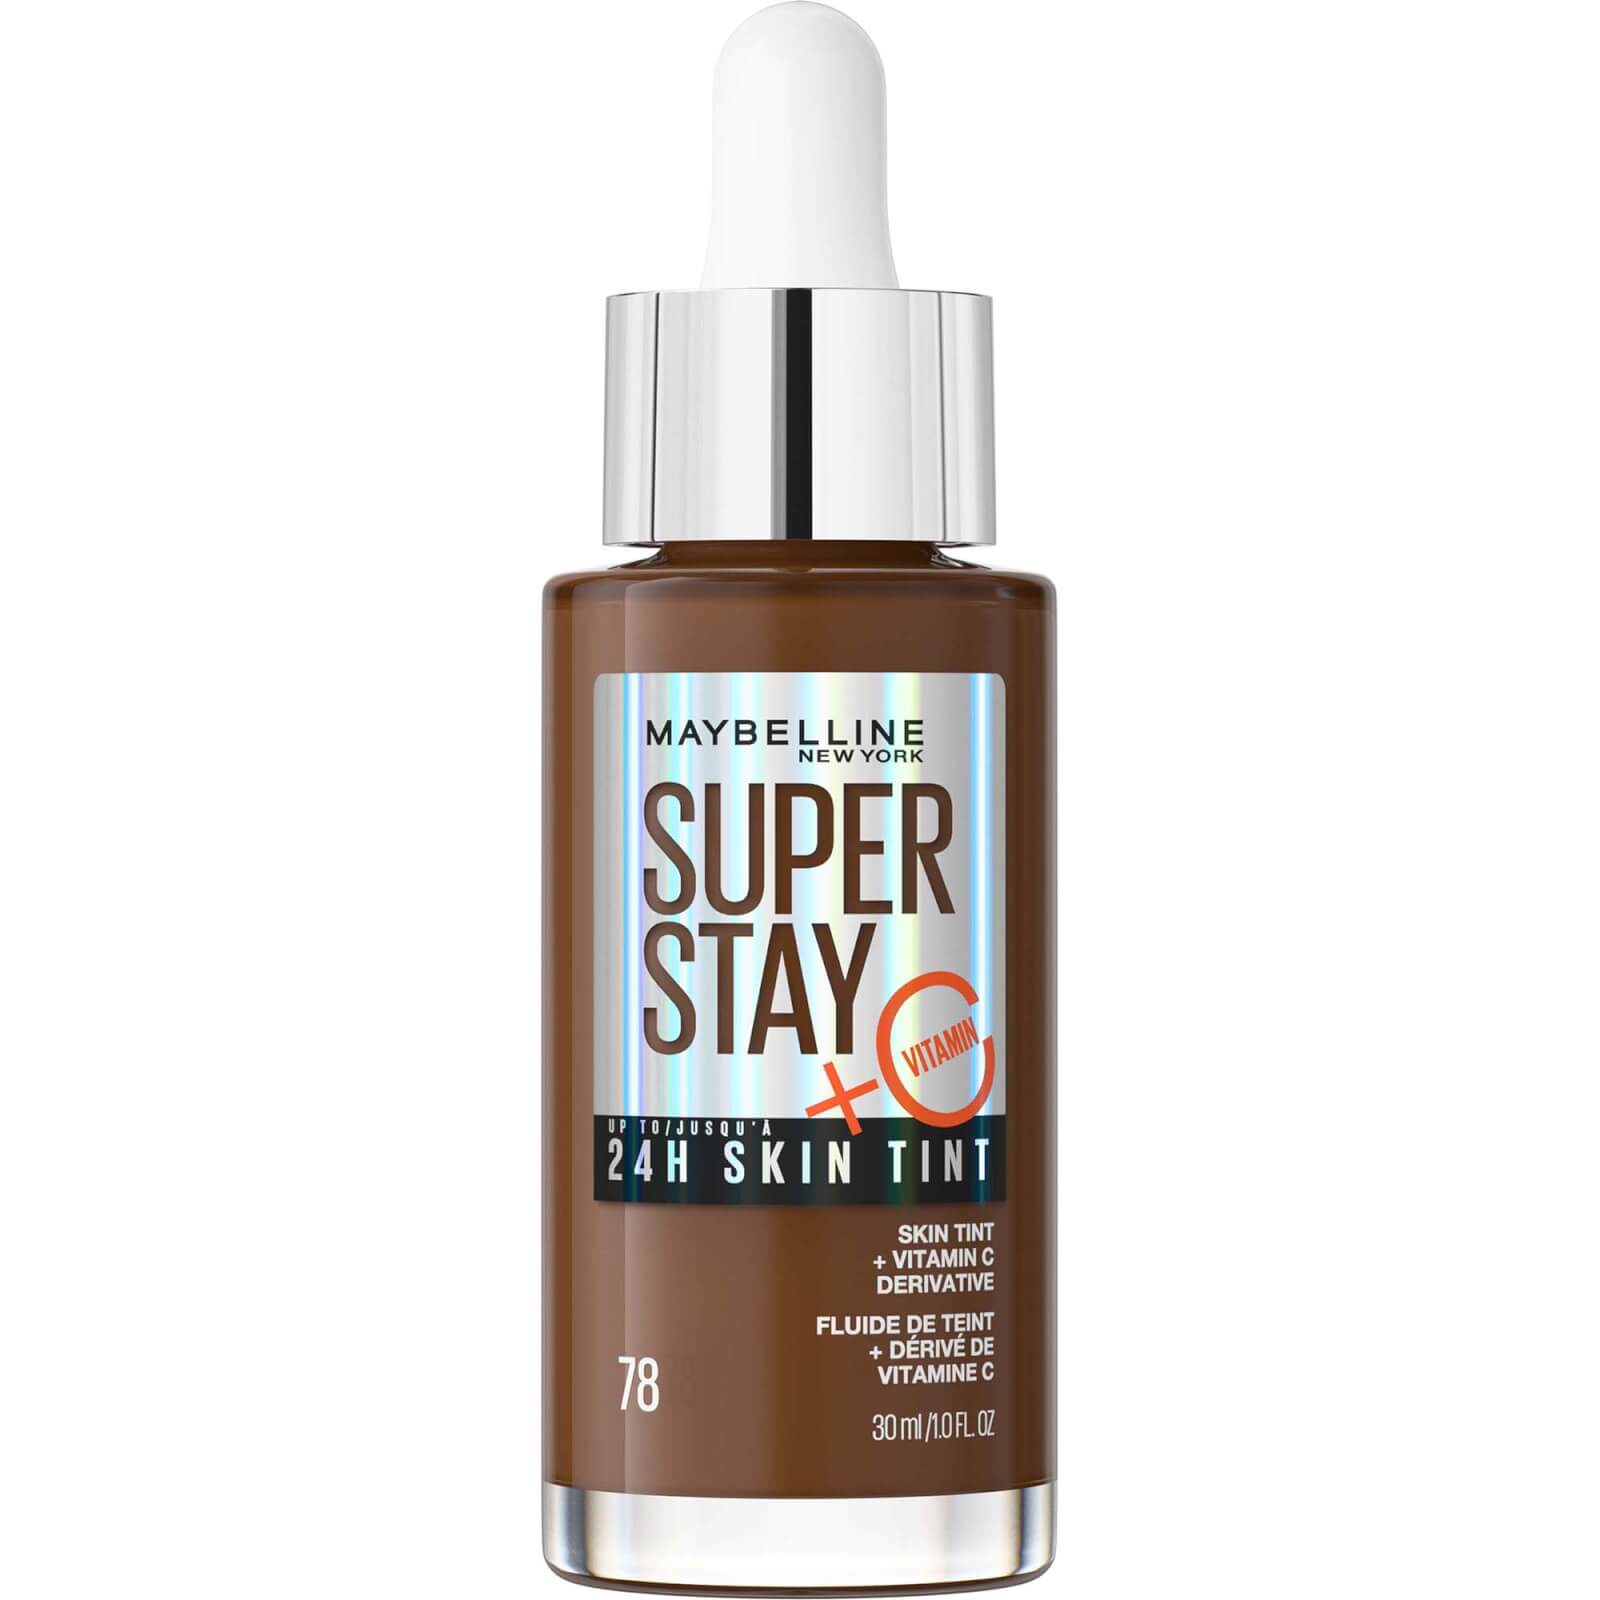 Maybelline Super Stay Up To 24h Skin Tint Foundation + Vitamin C 30ml (various Shades) - 78 In Neutral